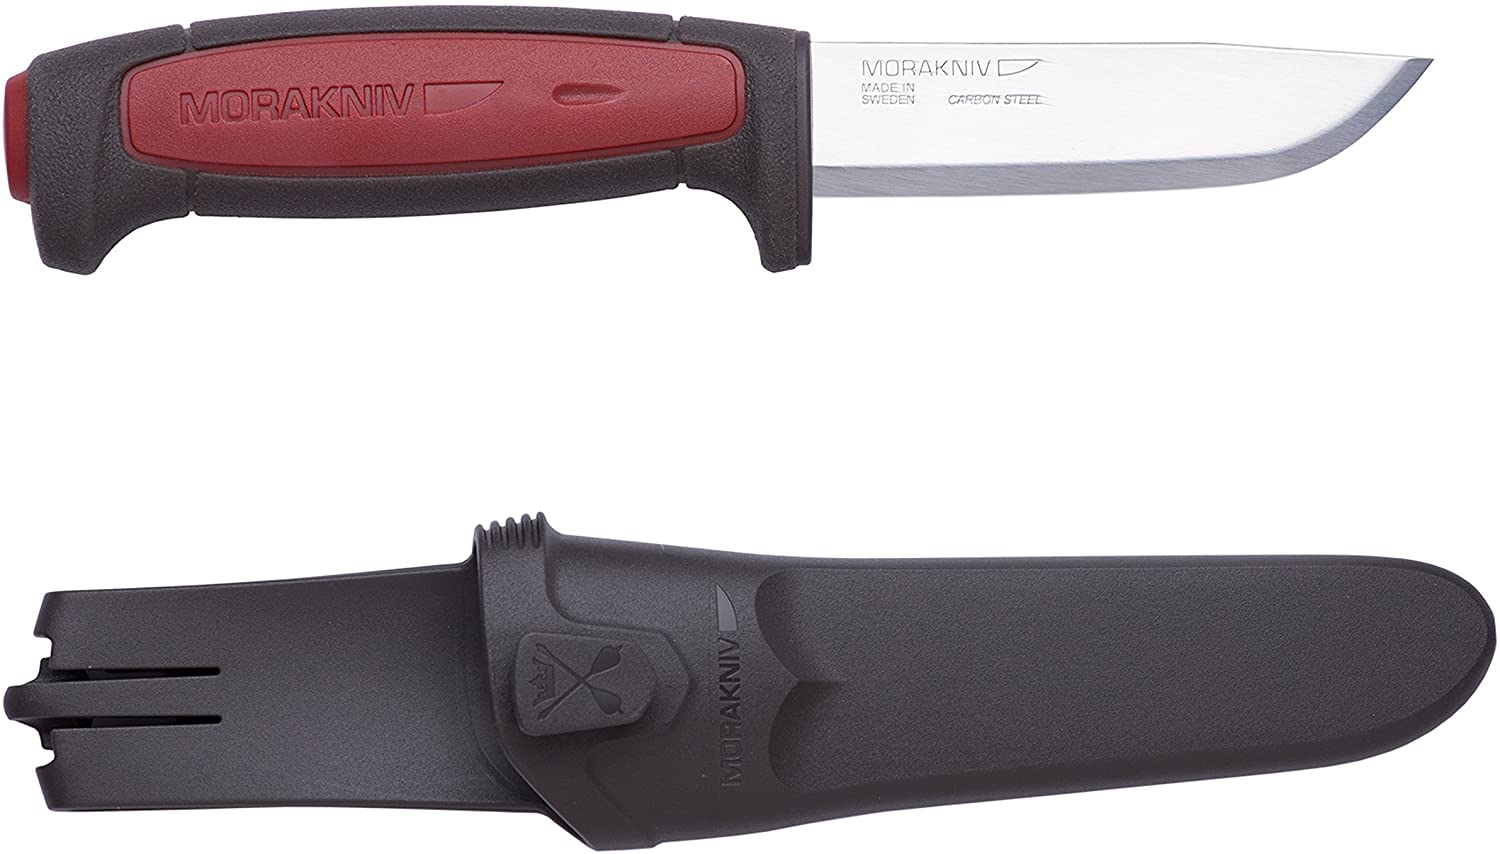 Mora Craftline Outdoor Knife available in Black-Red